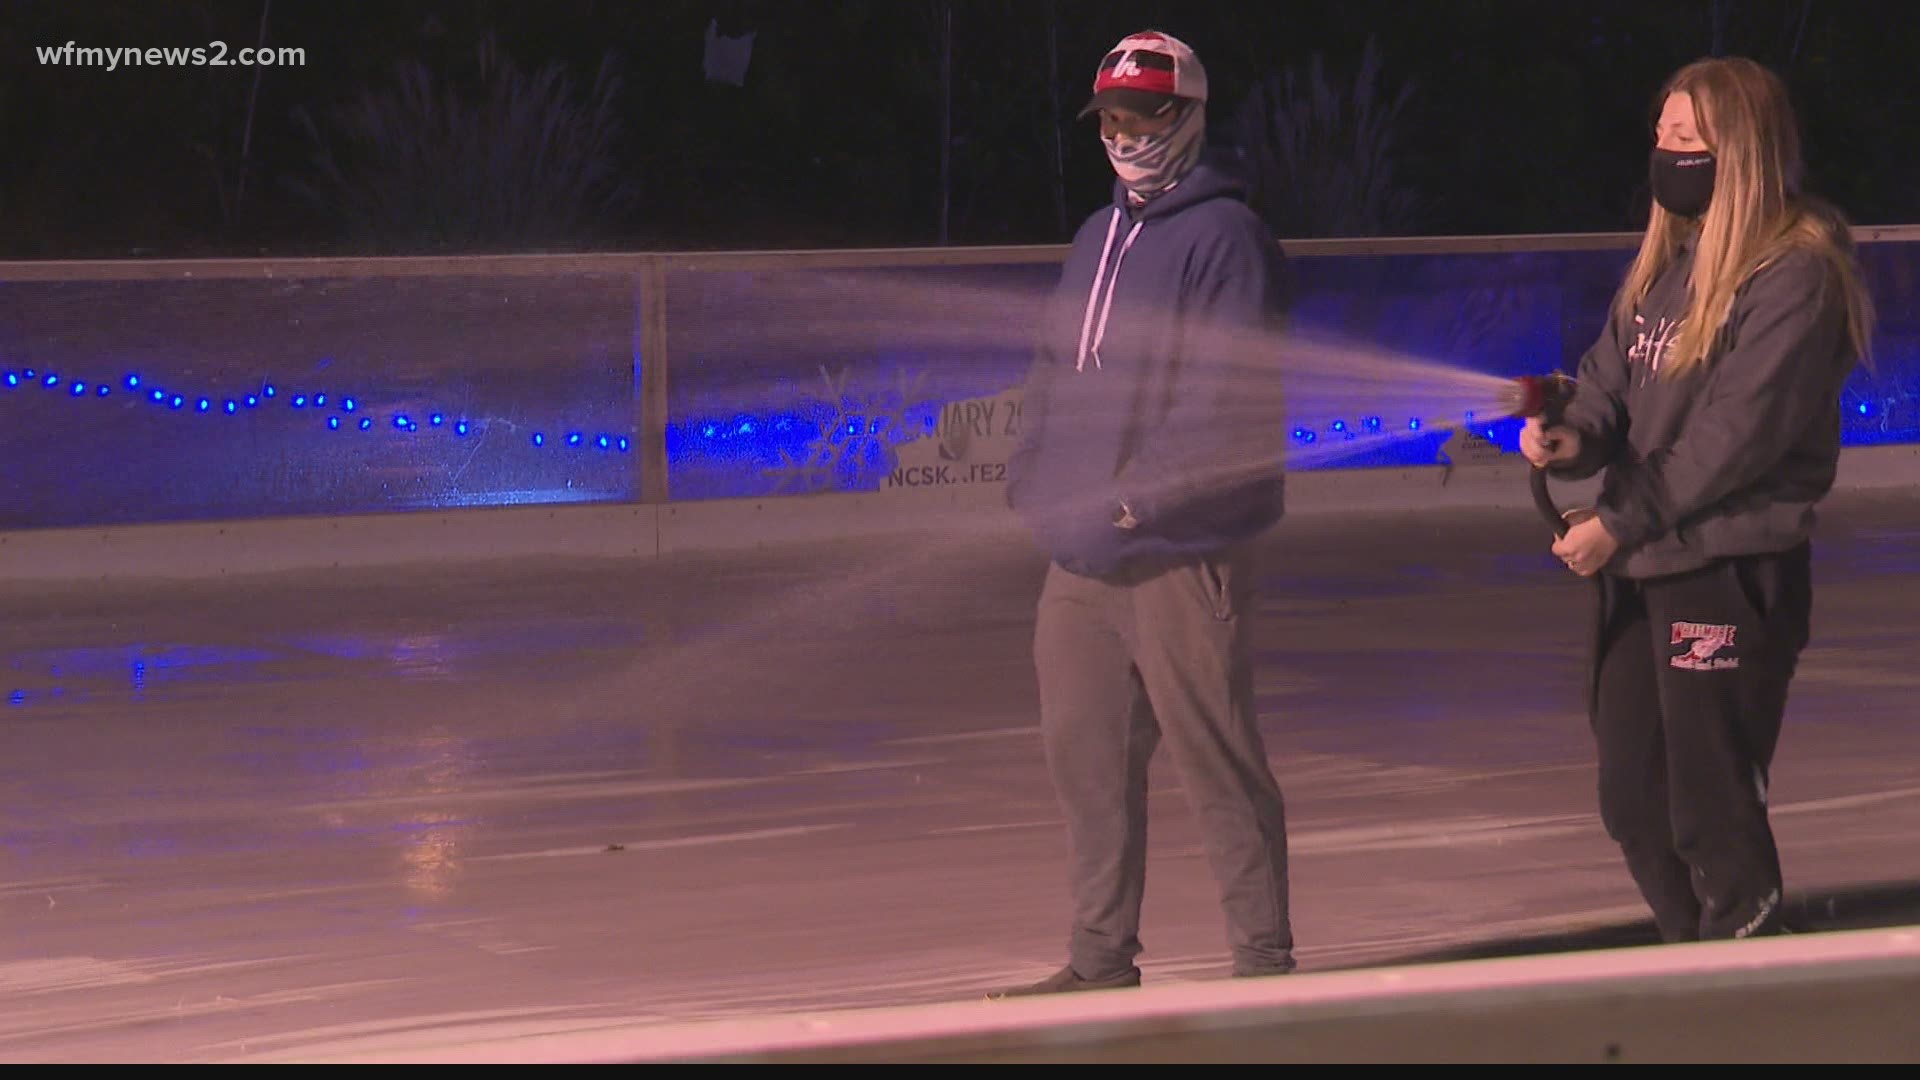 The popular seasonal Greensboro skating rink will be set up in a different part of downtown. Organizers say they put social distancing rules in place too.